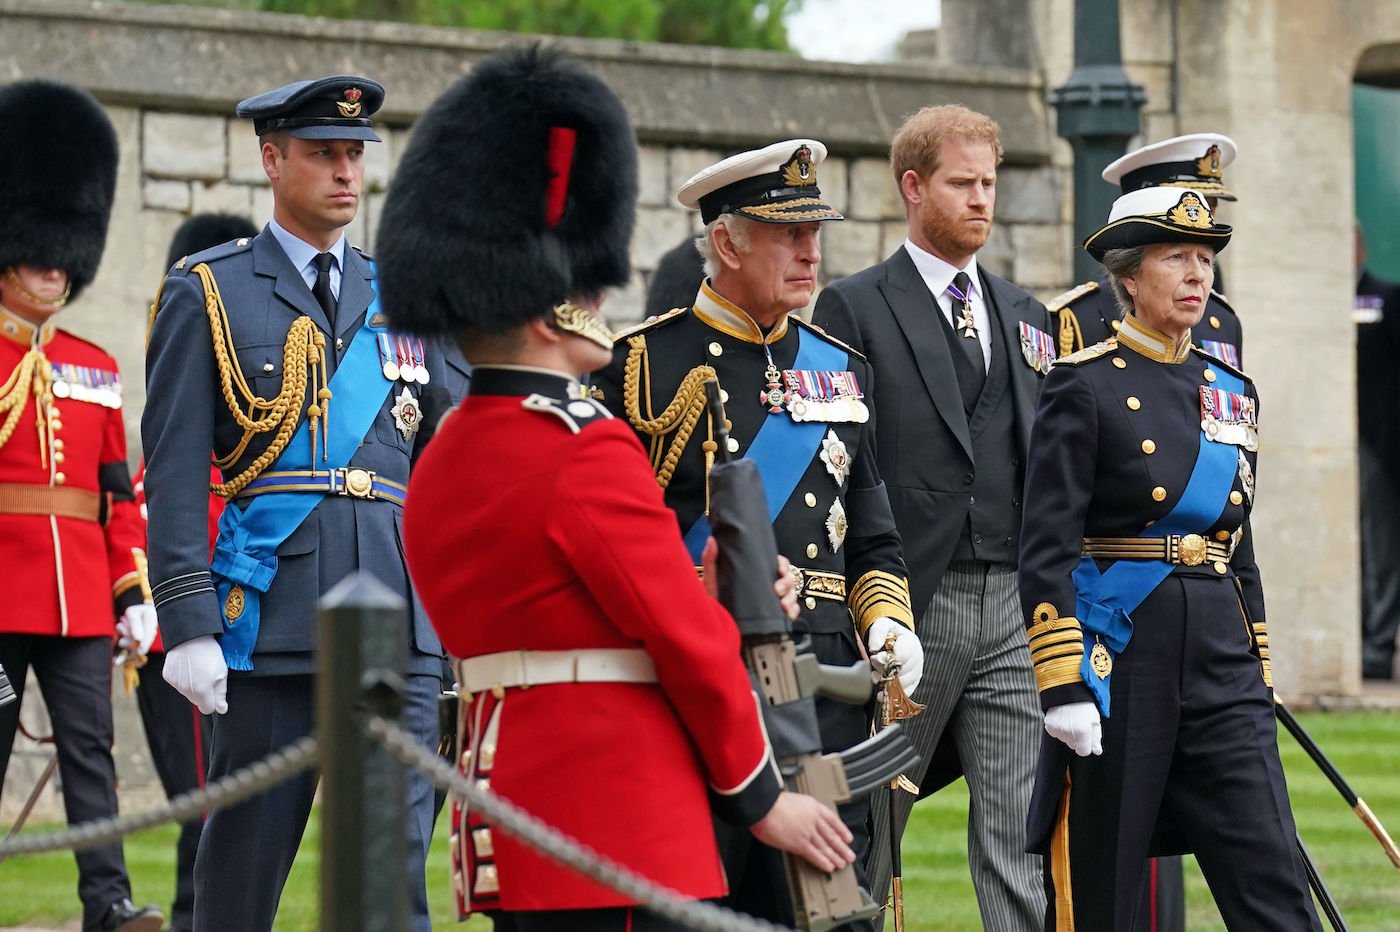 Prince William, Prince of Wales, Prince Harry, Duke of Sussex, Peter Phillips, King Charles III, Princess Anne, Princess Royal and Prince Andrew, Duke of York at the Queen's funeral